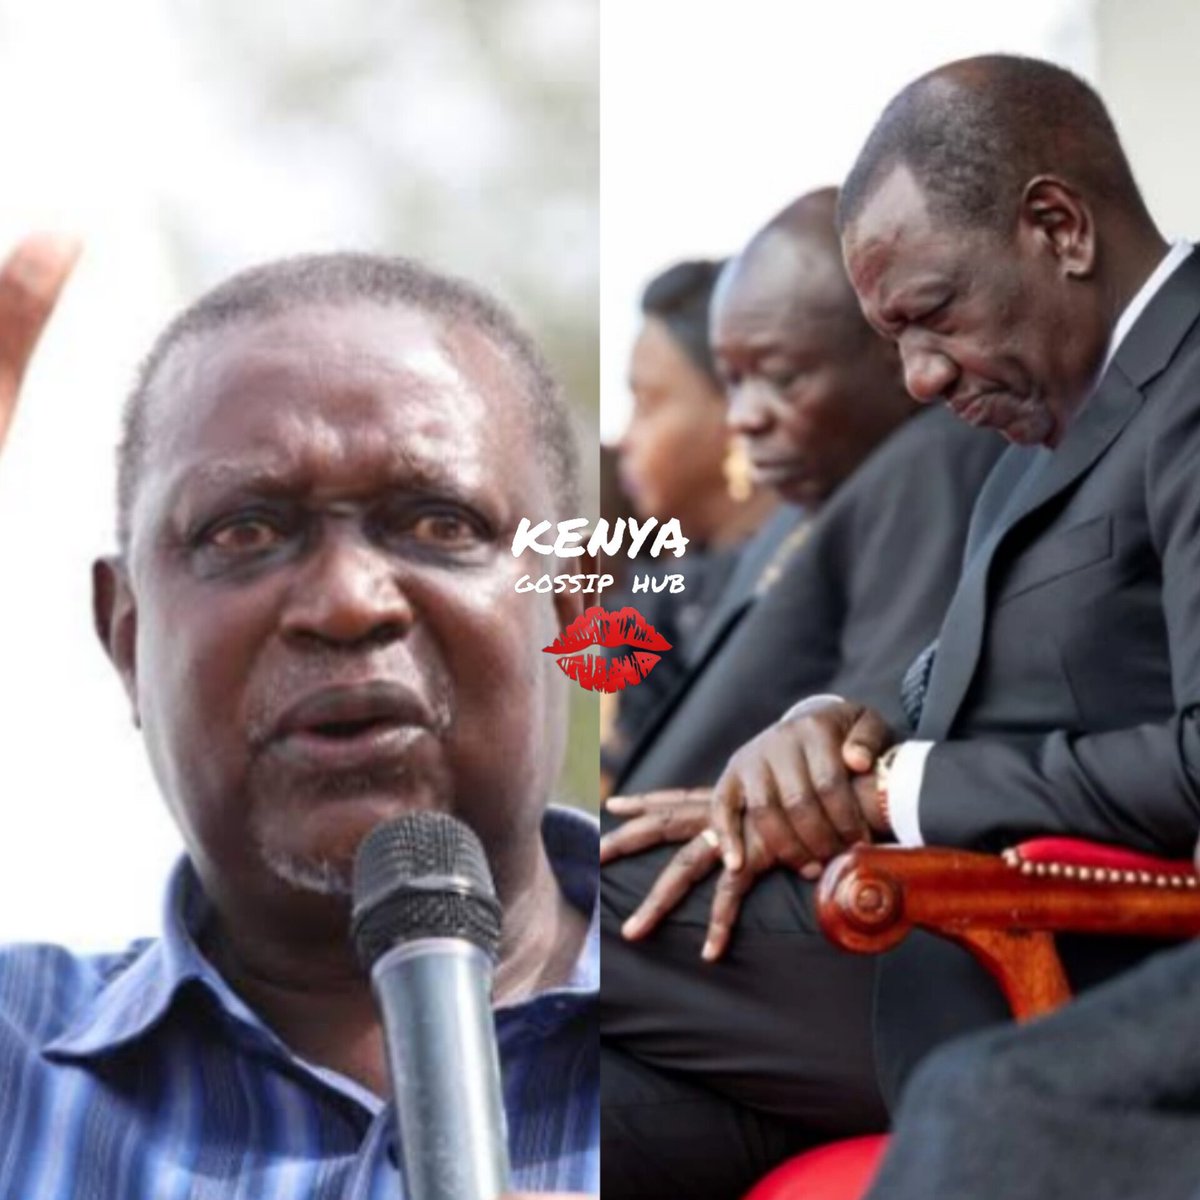 Fearless Oburu Odinga demands the truth about the death of Francis Ogolla from President William Ruto. Watch